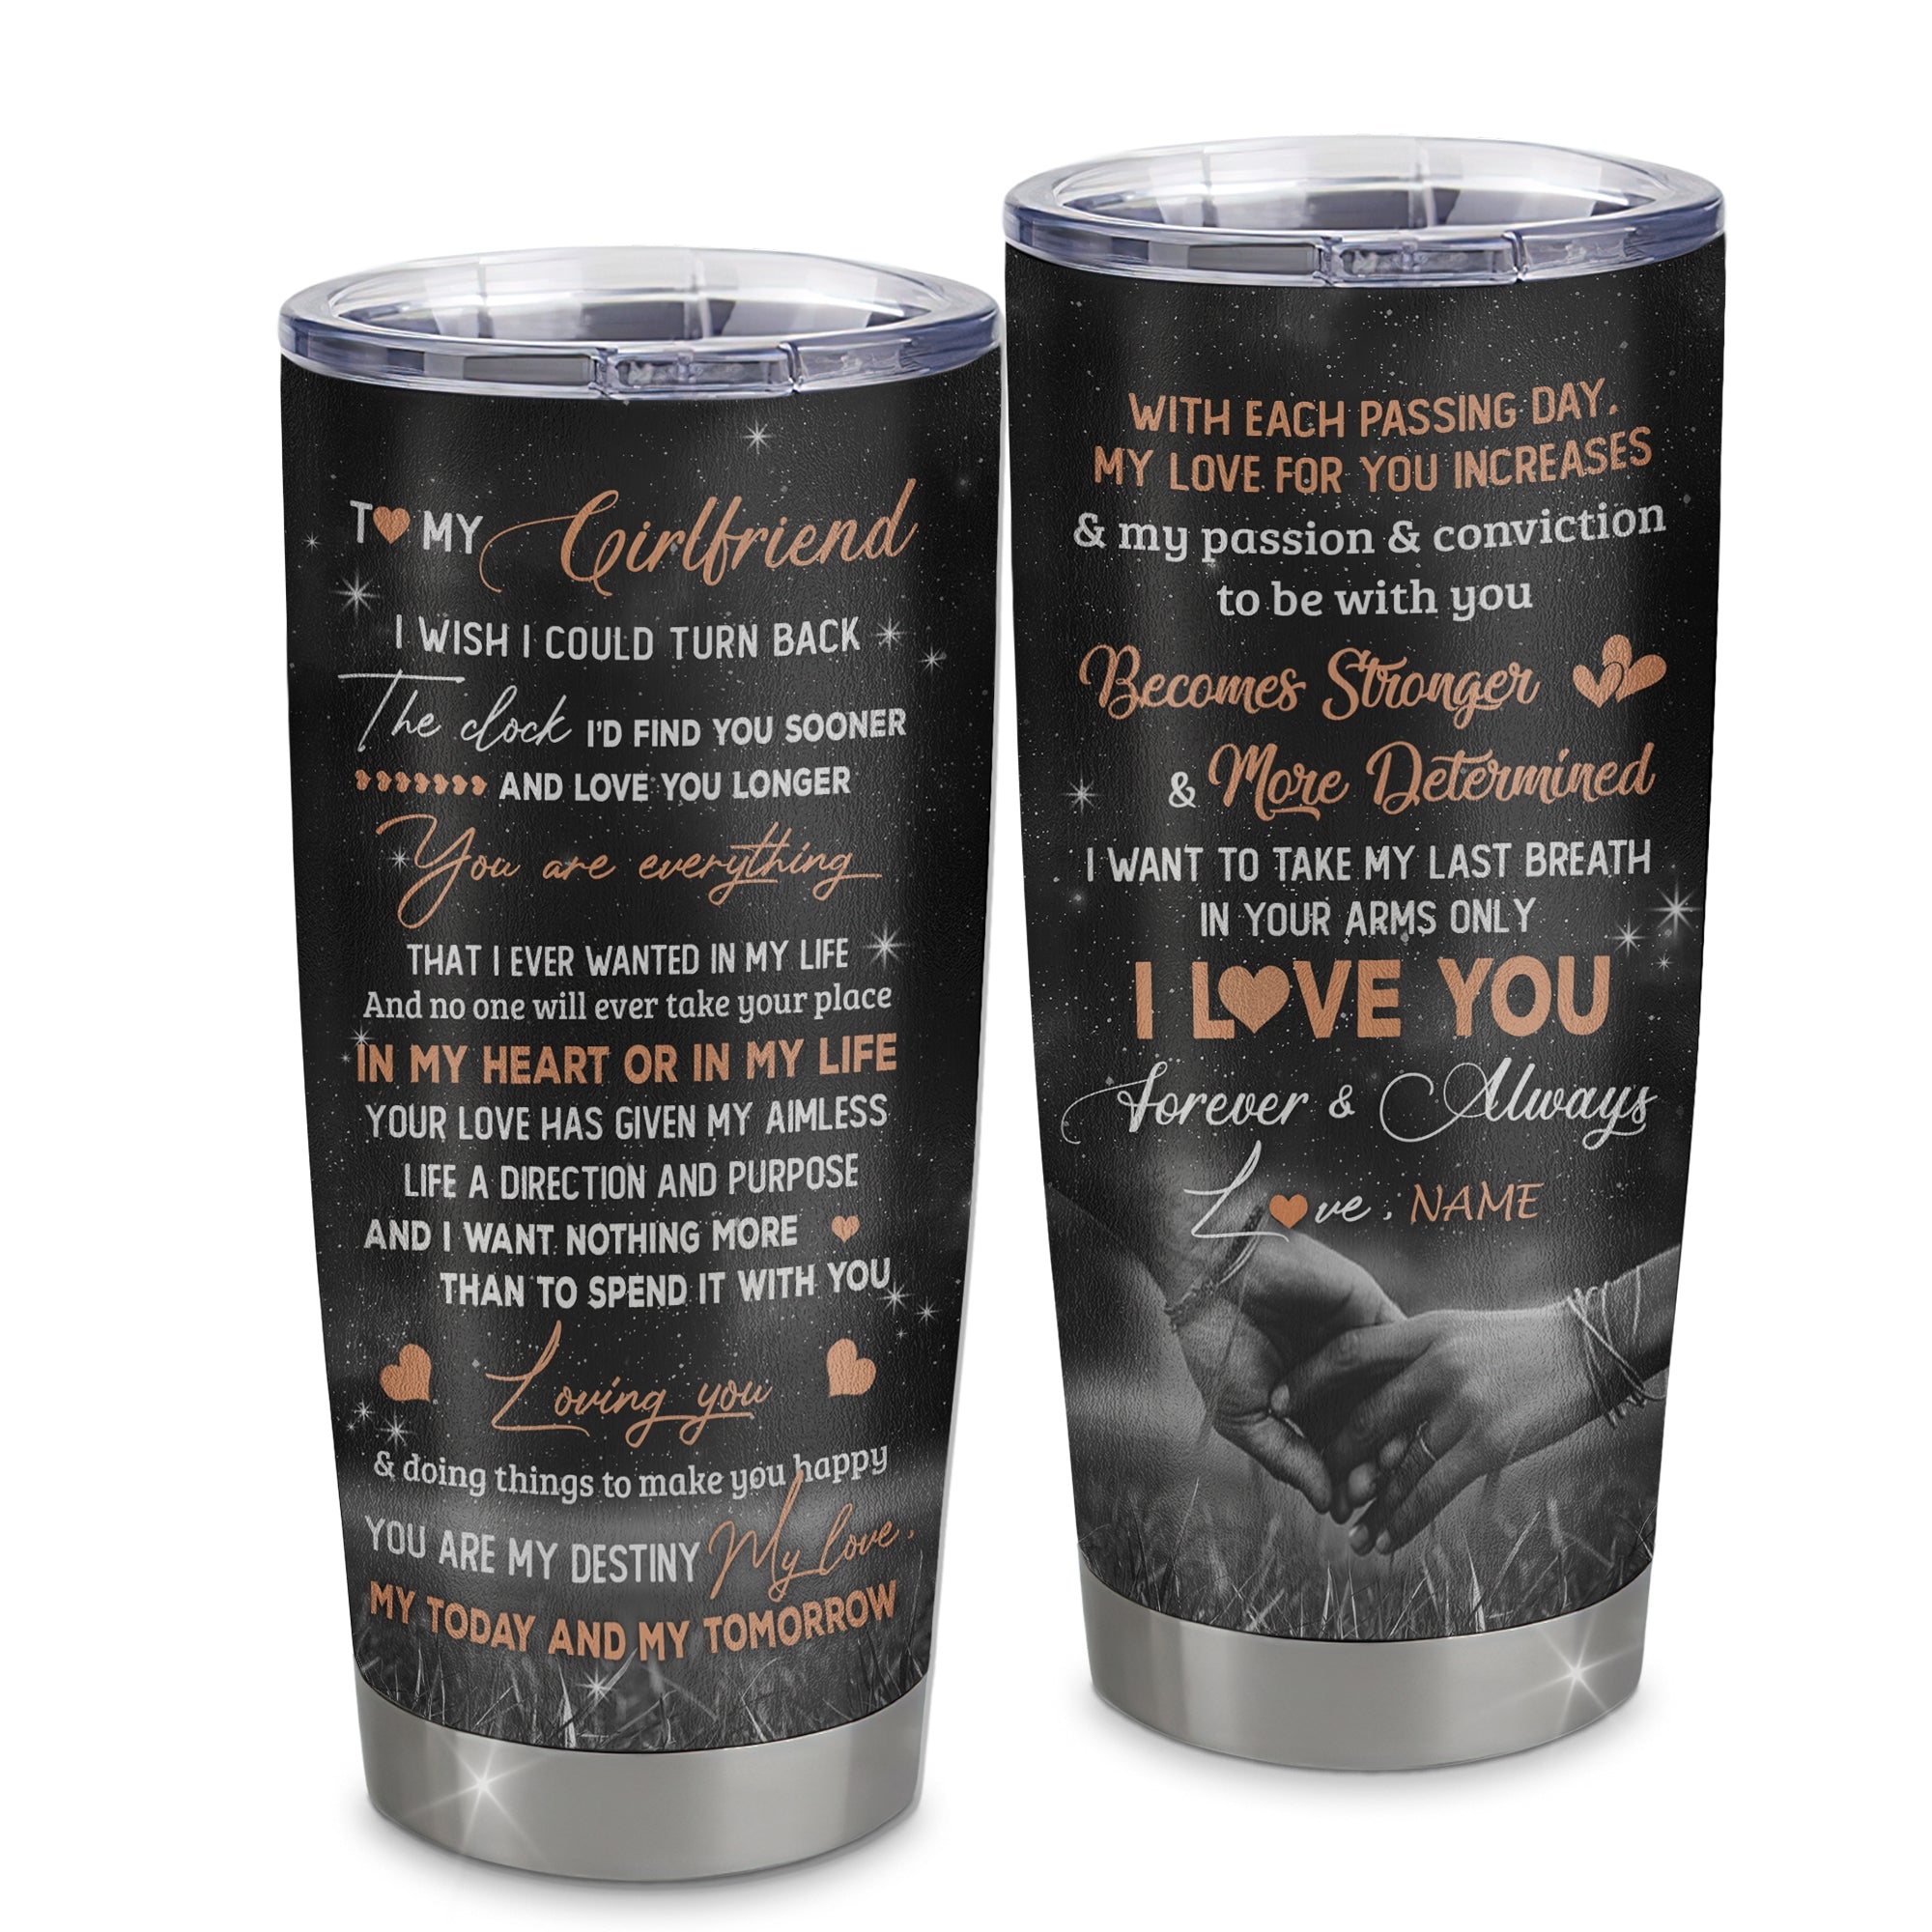 Personalized To My Girlfriend Tumbler From Boyfriend I’d Find You Sooner Love You Longer Girlfriend Gift Anniversary Valentines Day Christmas Travel Mug